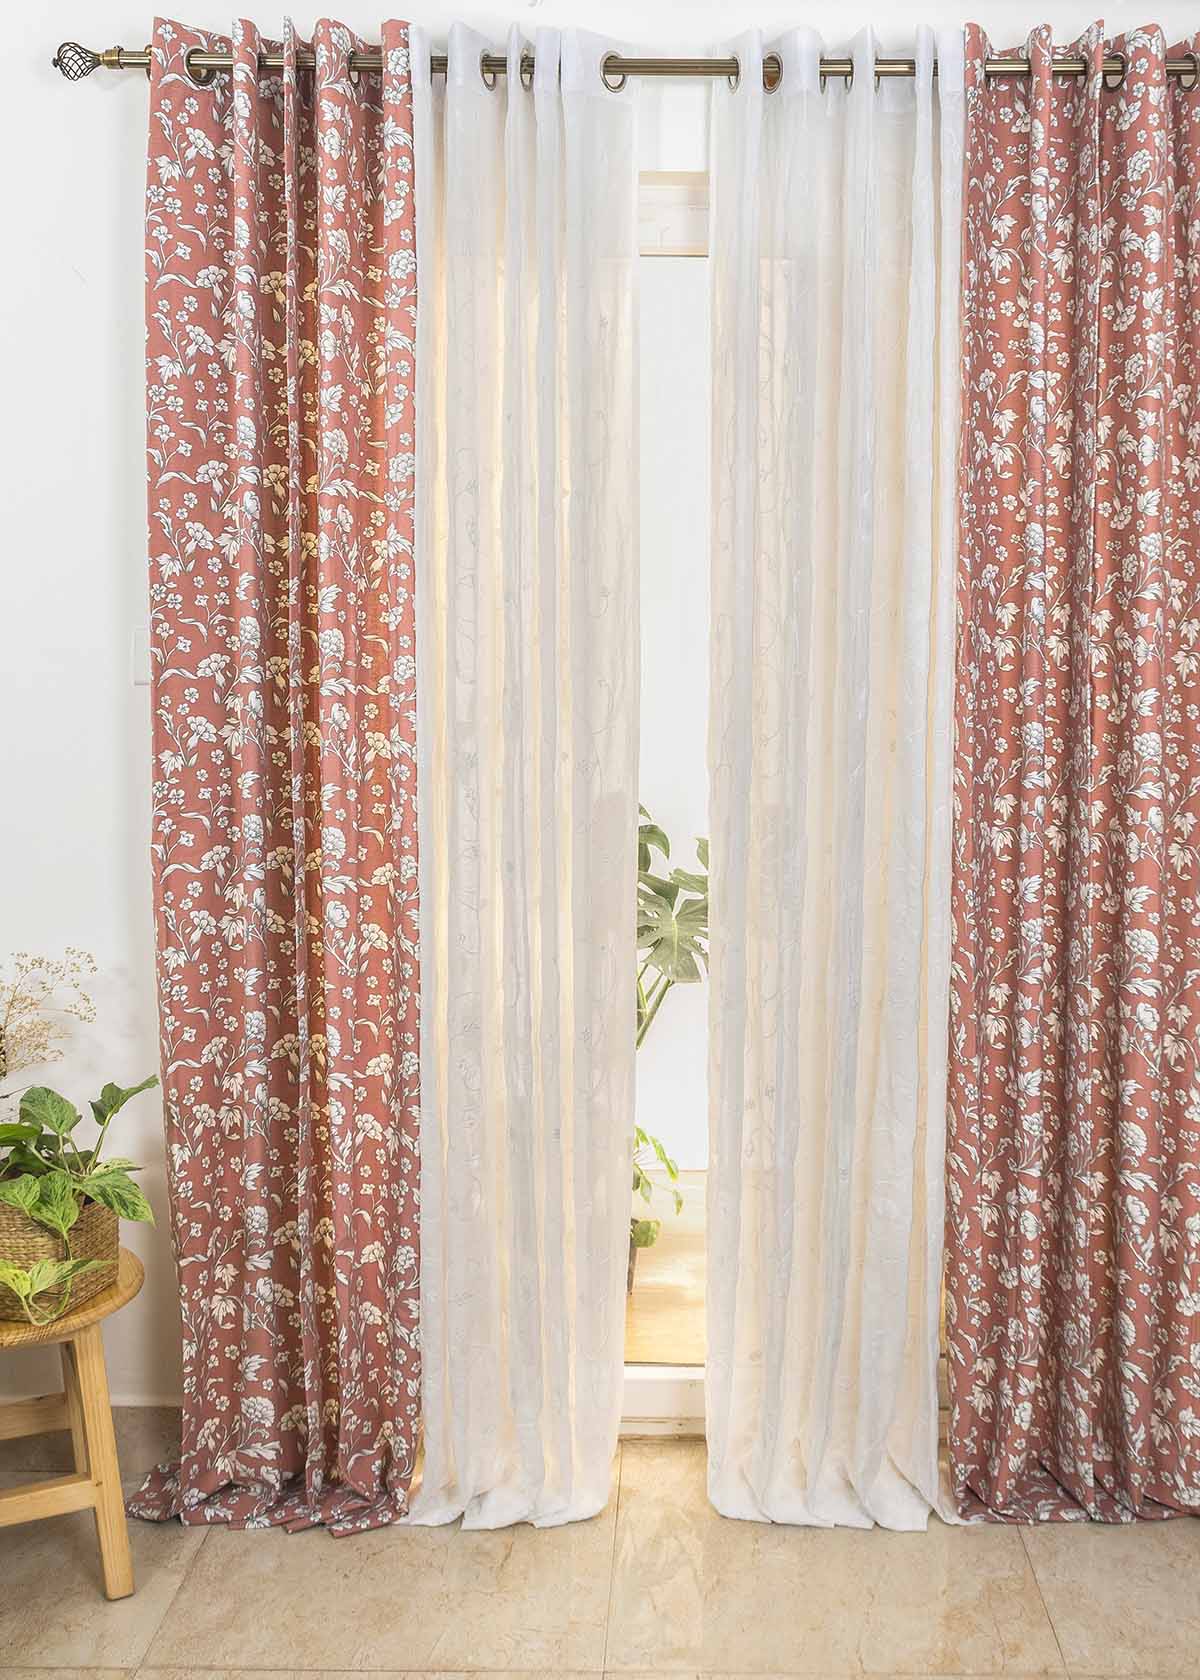 Marigold Rust, Ivy Vines Embroidered Pure White Sheer Set Of 4 Combo Cotton Curtain - Rust And White